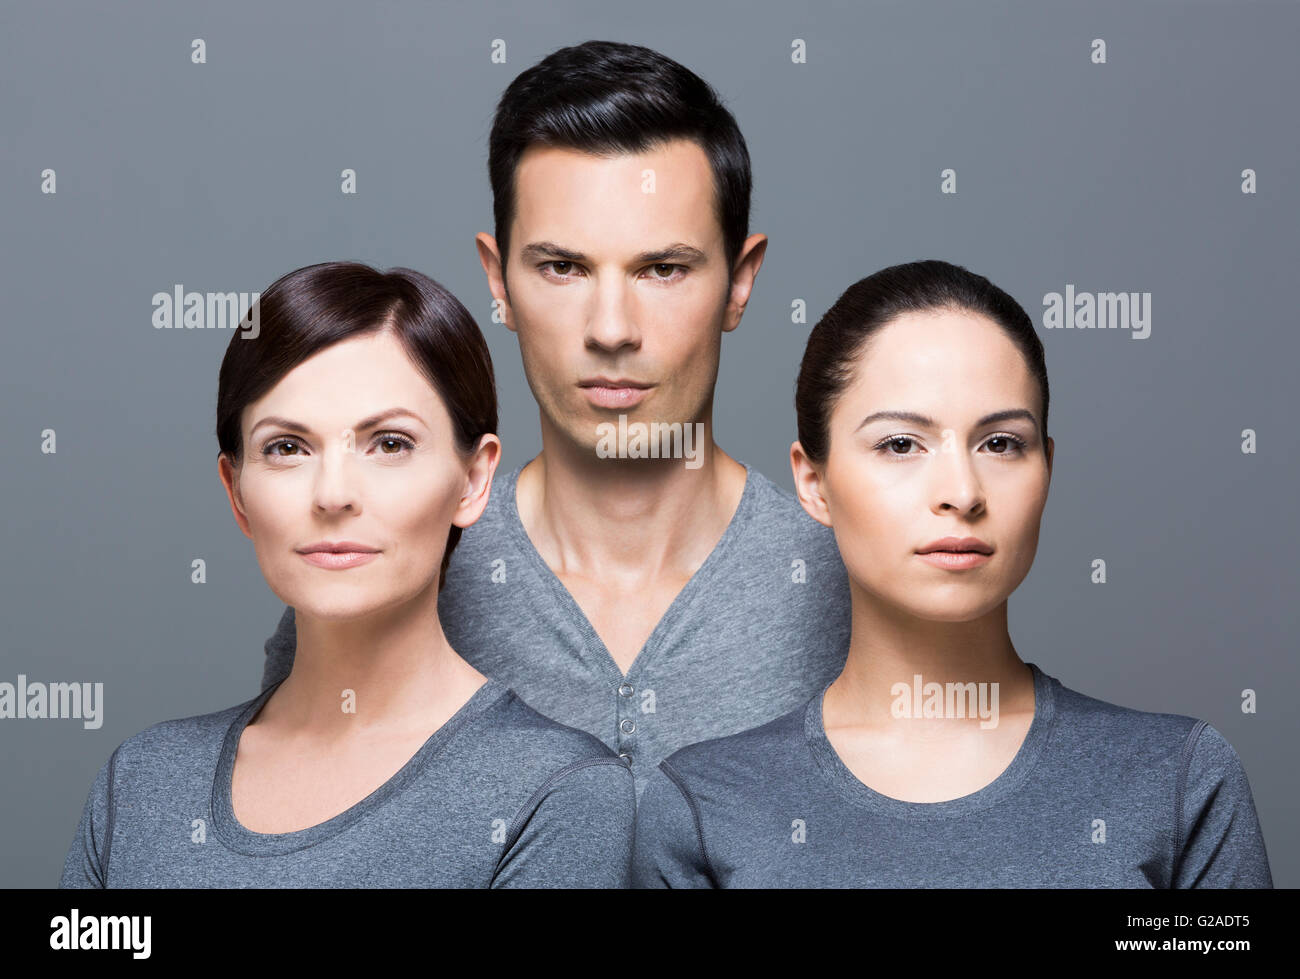 Man and two women wearing grey tops Stock Photo